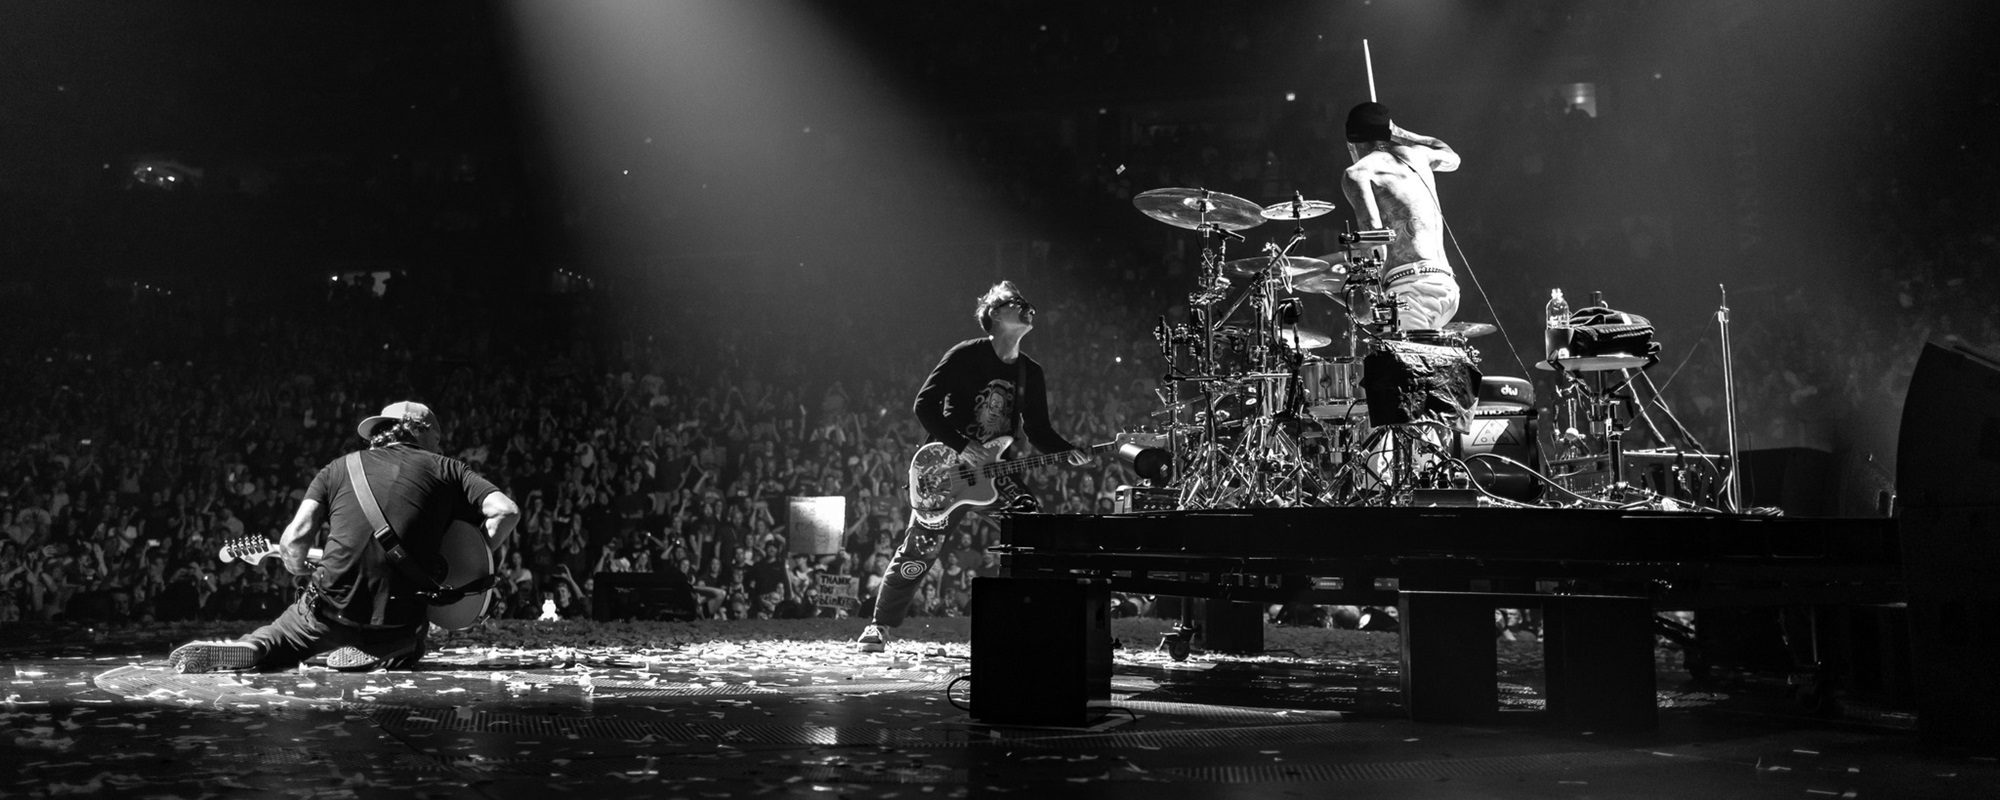 Photo courtesy of Blink-182's official Facebook page